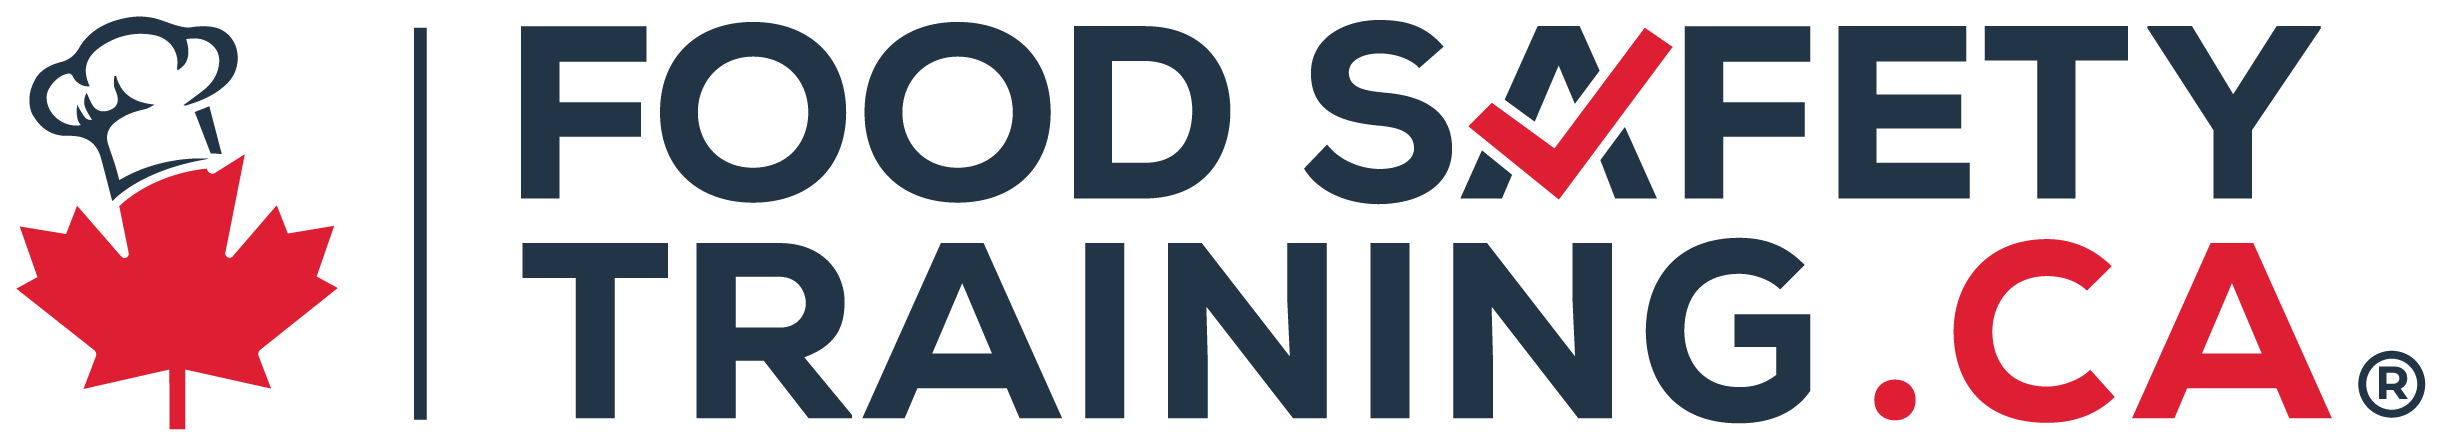 Food Safety Training discount codes